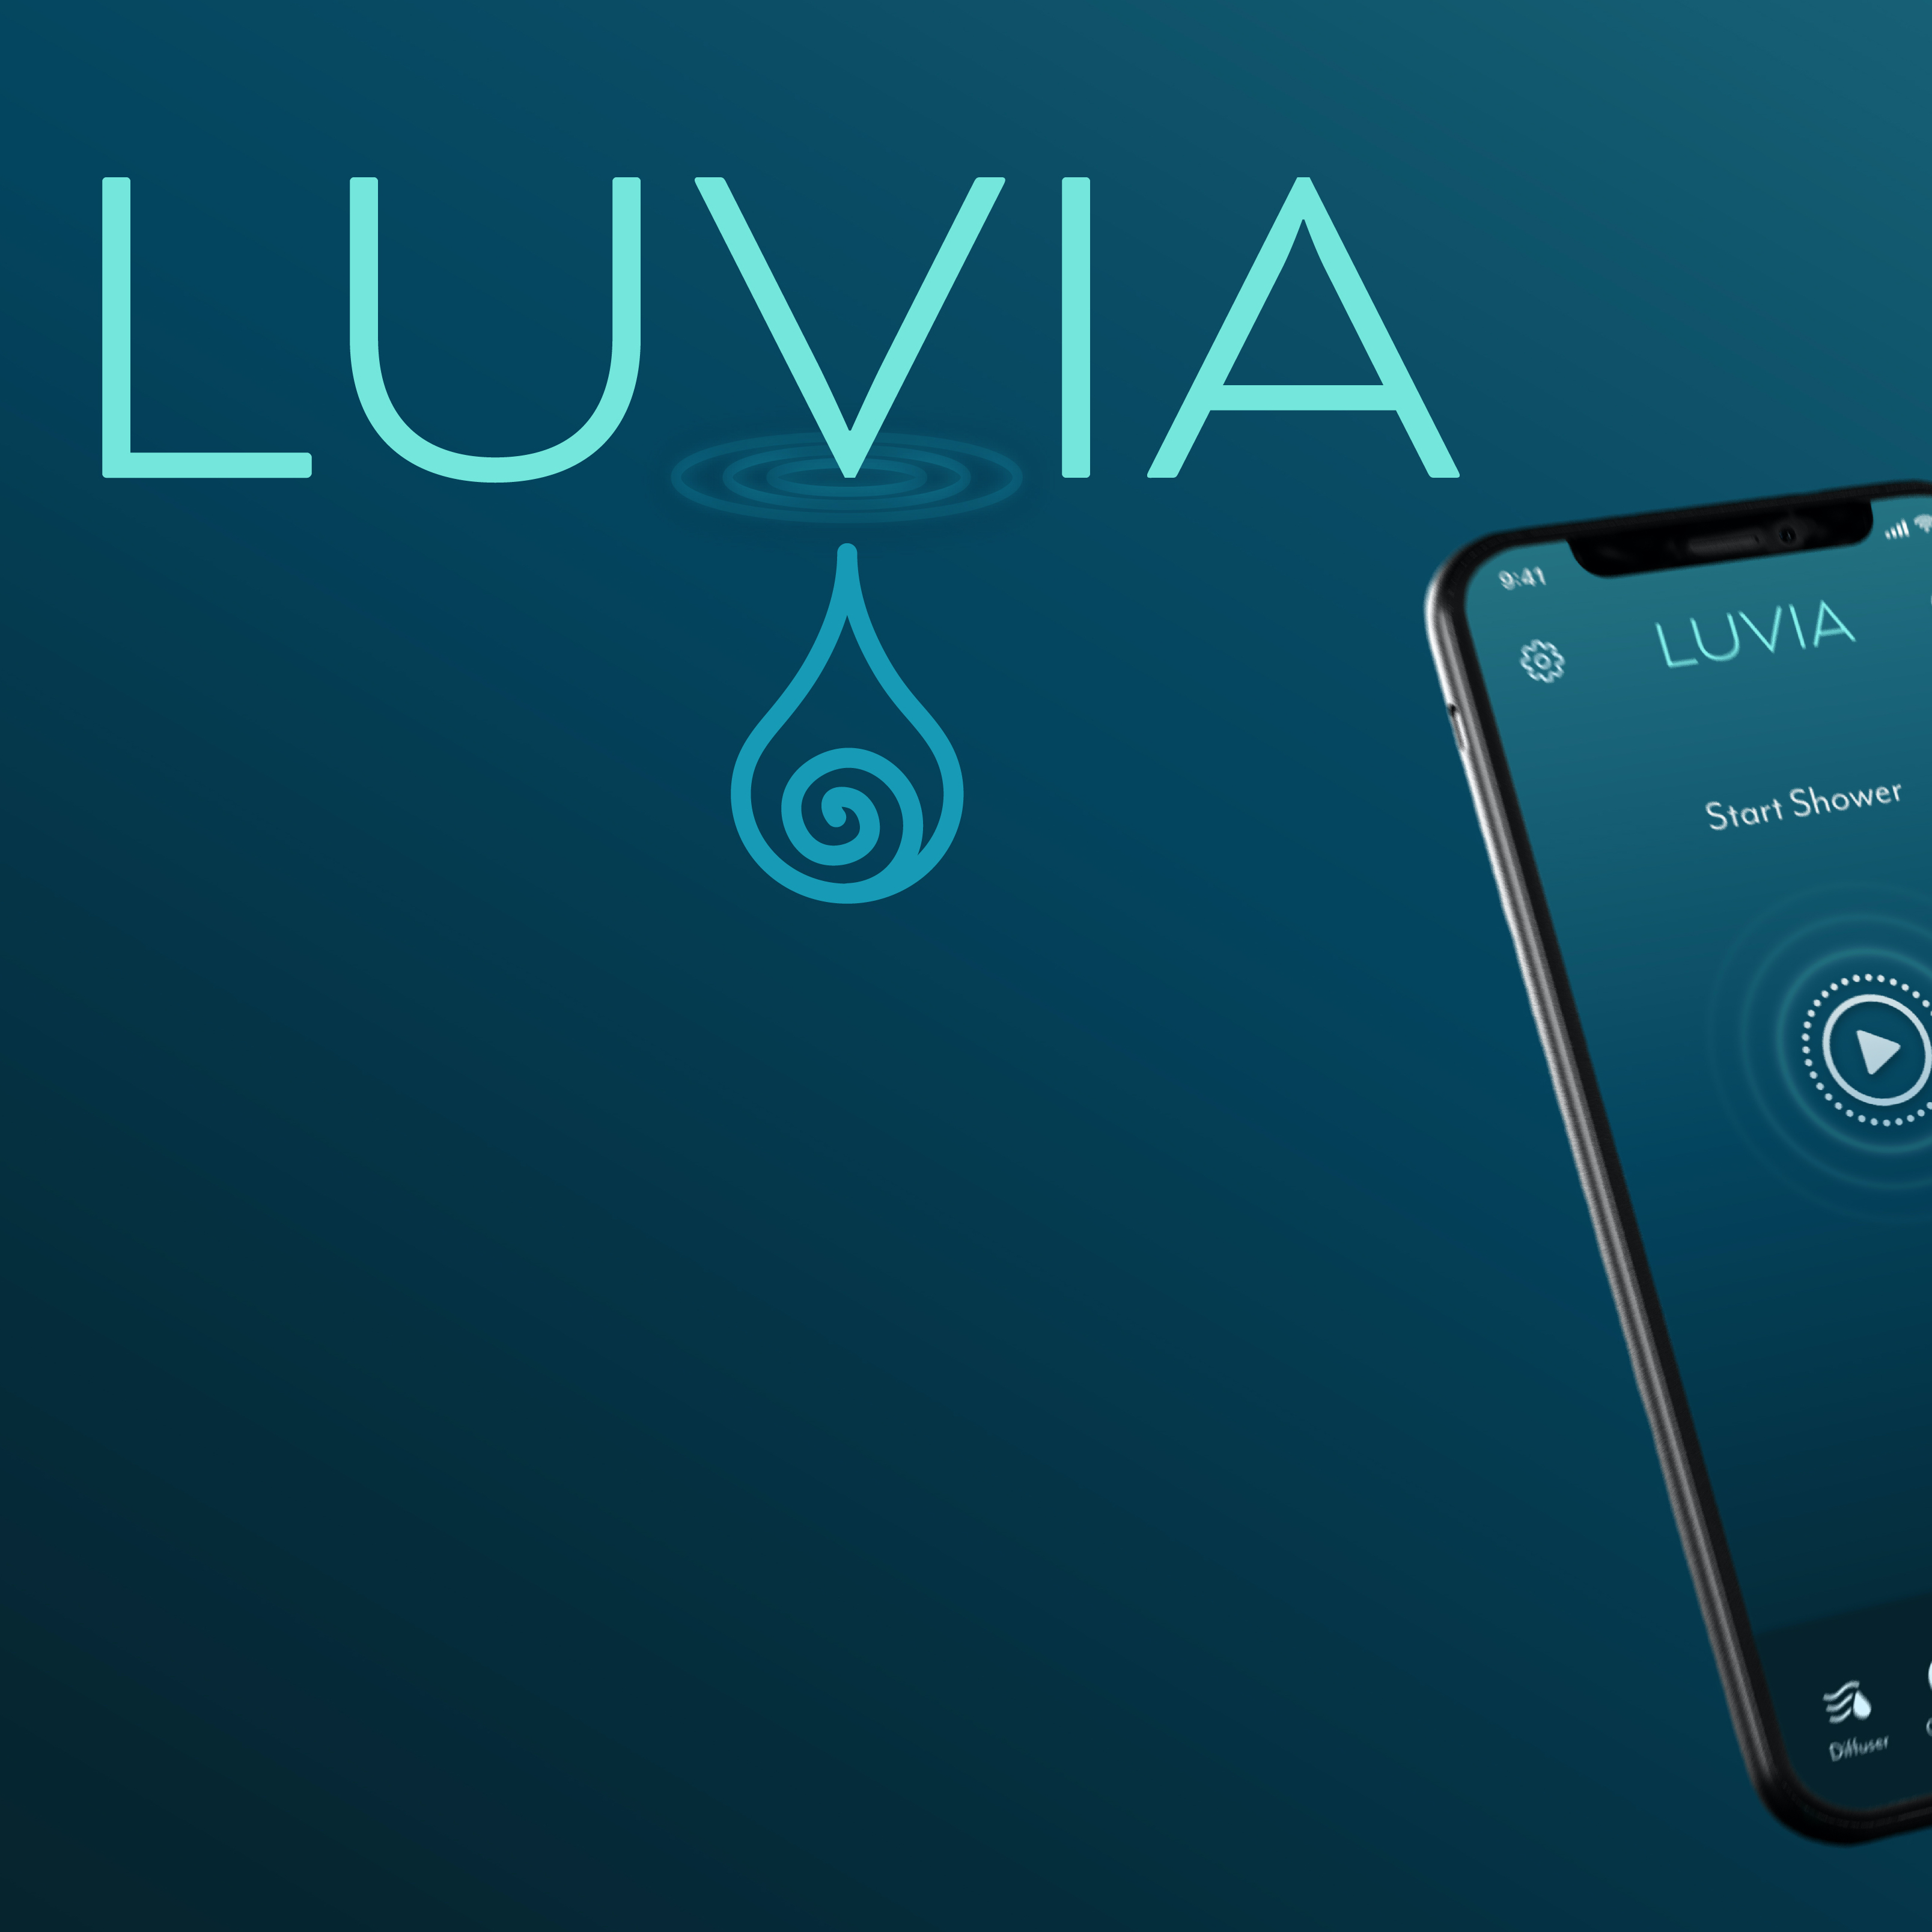 LUVIA Smart Shower System: Application Design and Prototyping